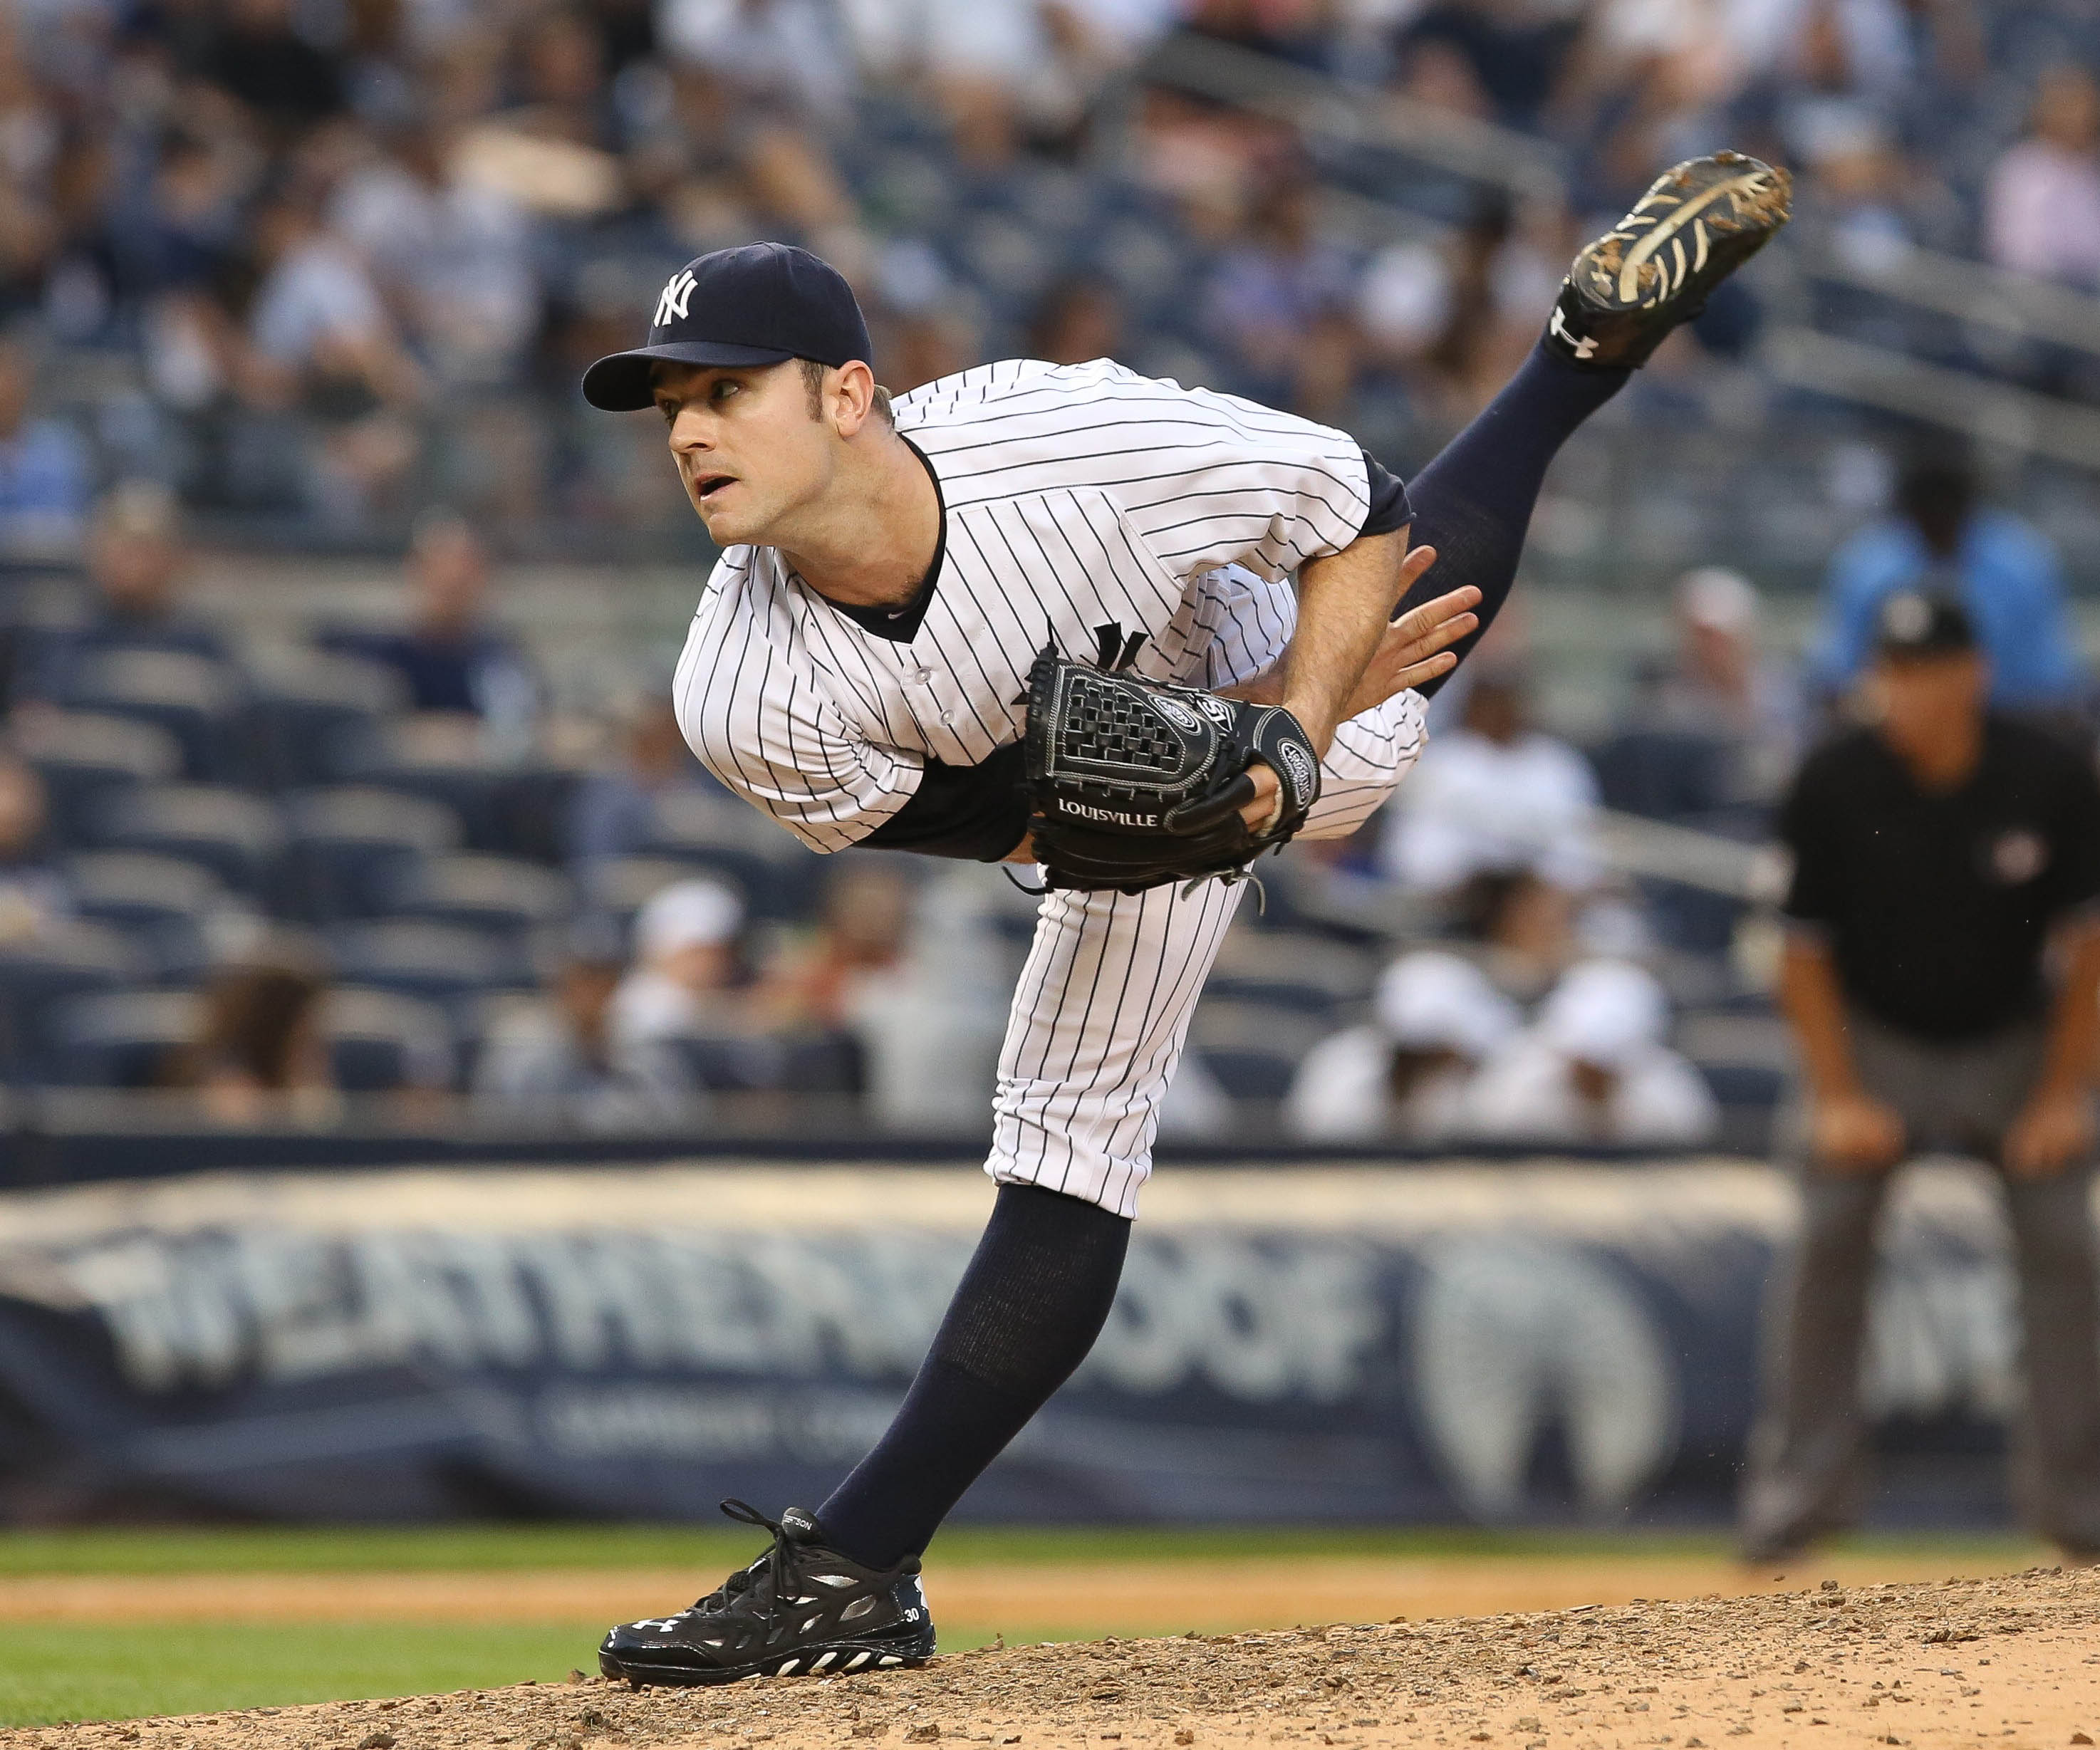 David Robertson could be the next relief pitcher to get a big contract. (USA TODAY Sports)